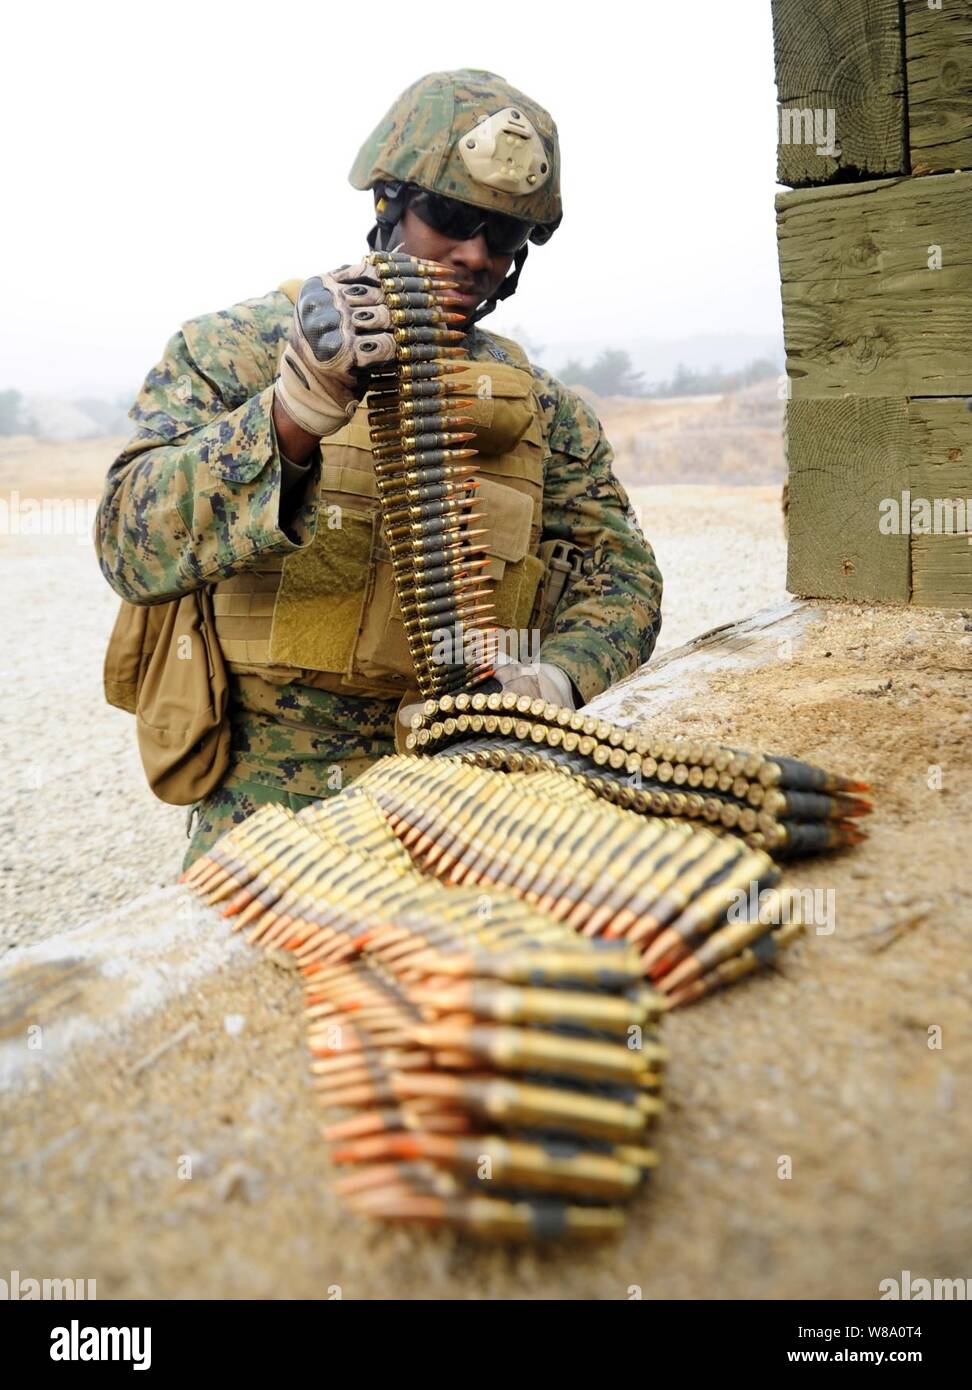 U.S. Marine Corps Sgt. Wendall Claxton, assigned to Fleet Antiterrorism Security Team Company Pacific, 2nd Platoon, prepares M240 machine gun ammunition before conducting a live-fire exercise at Camp Rodriguez, South Korea, on March 8, 2012. Stock Photo